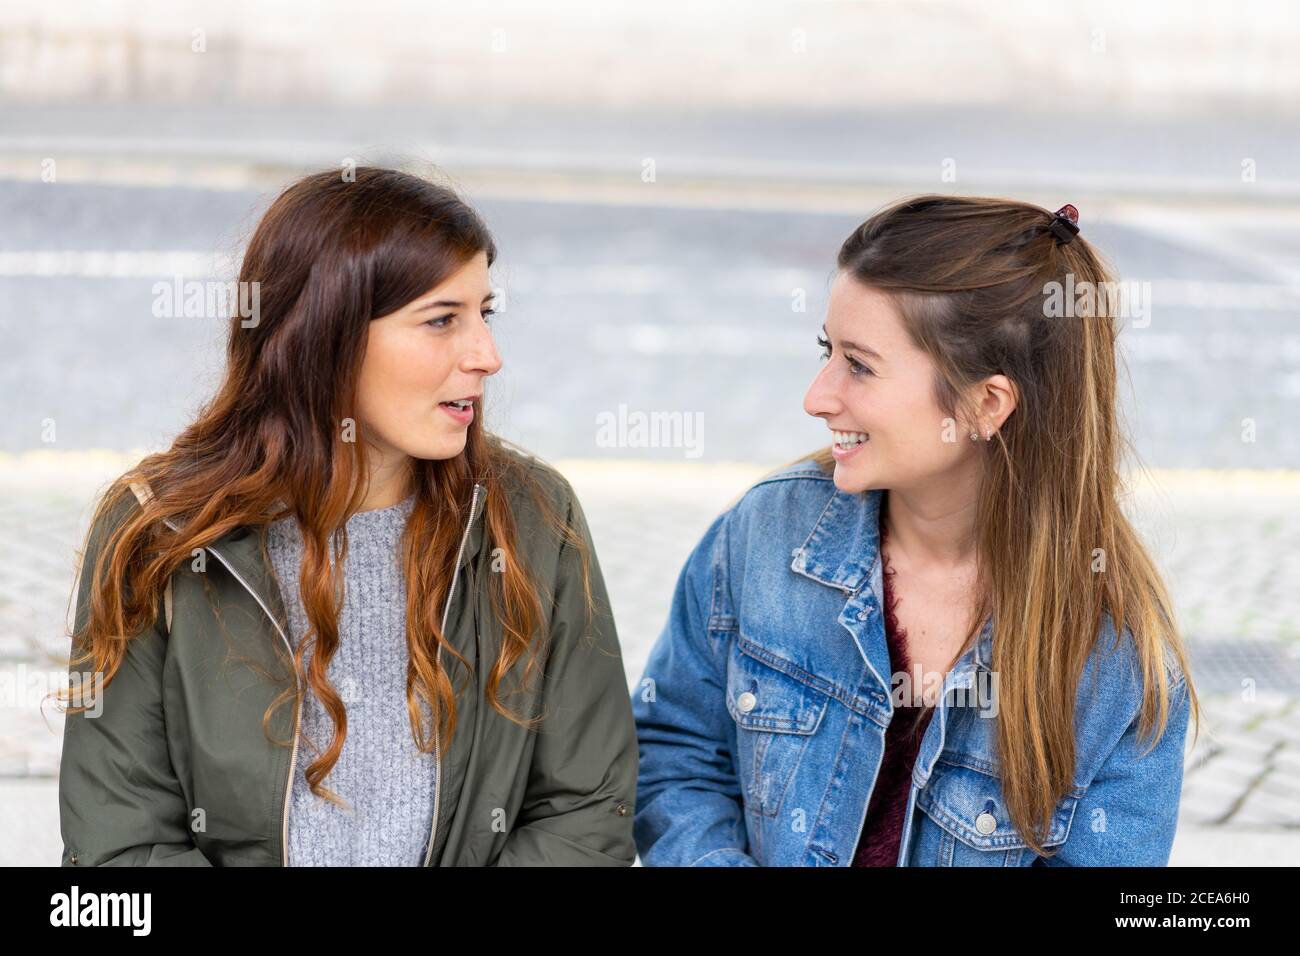 Young ladies in casual wear sitting on bench Stock Photo